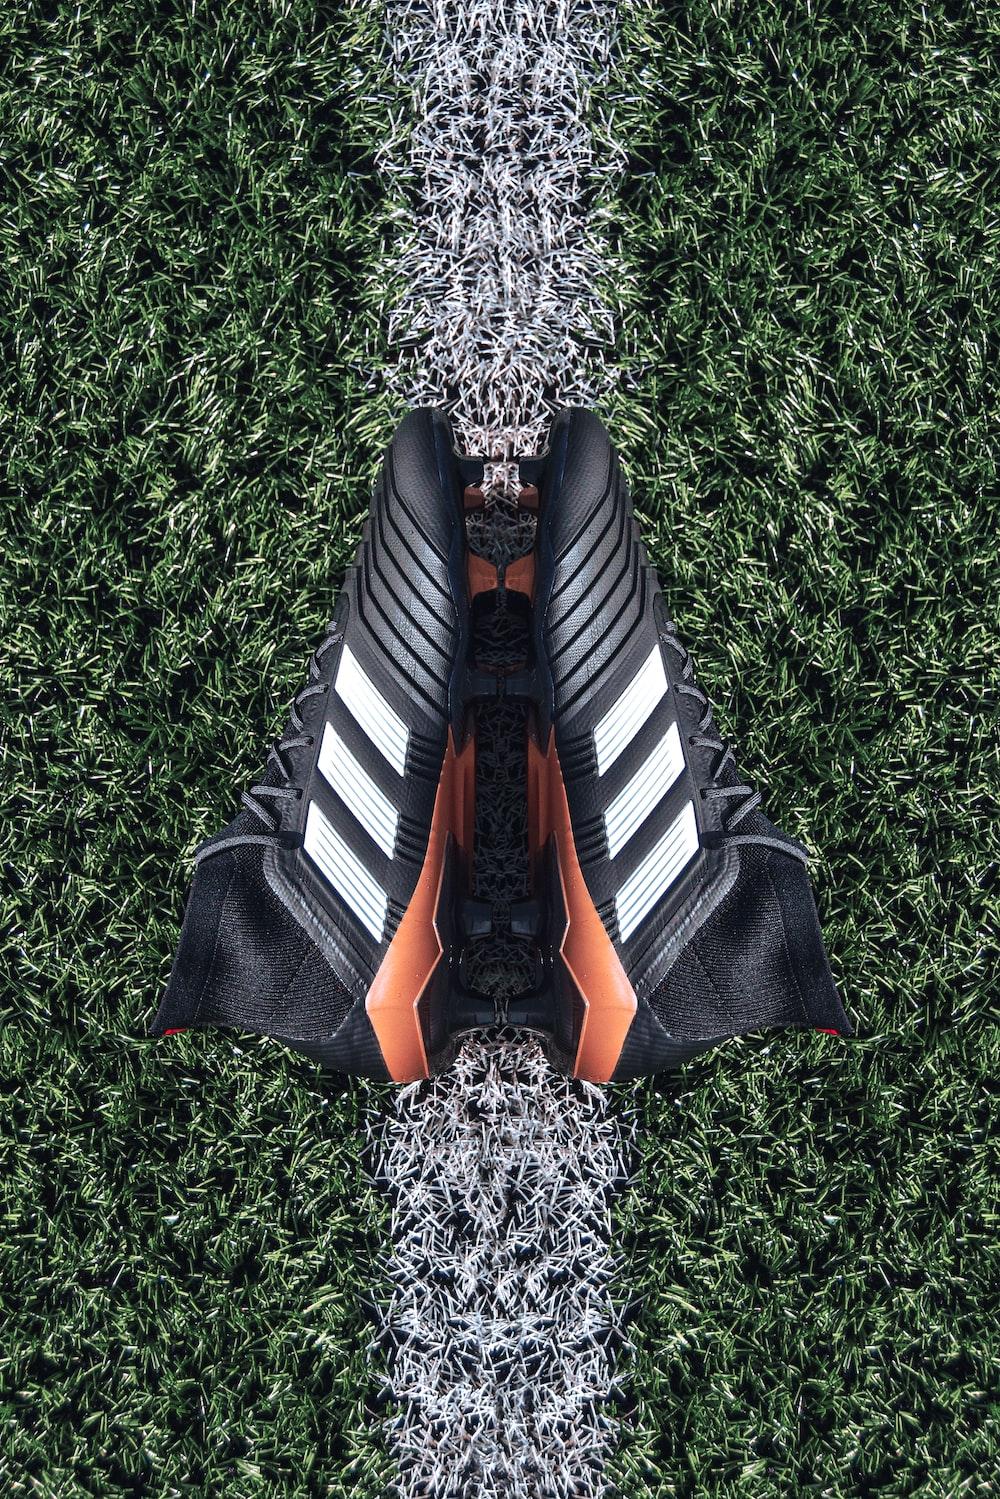 Pair Of Black Adidas Cleats On Grass Field Photo